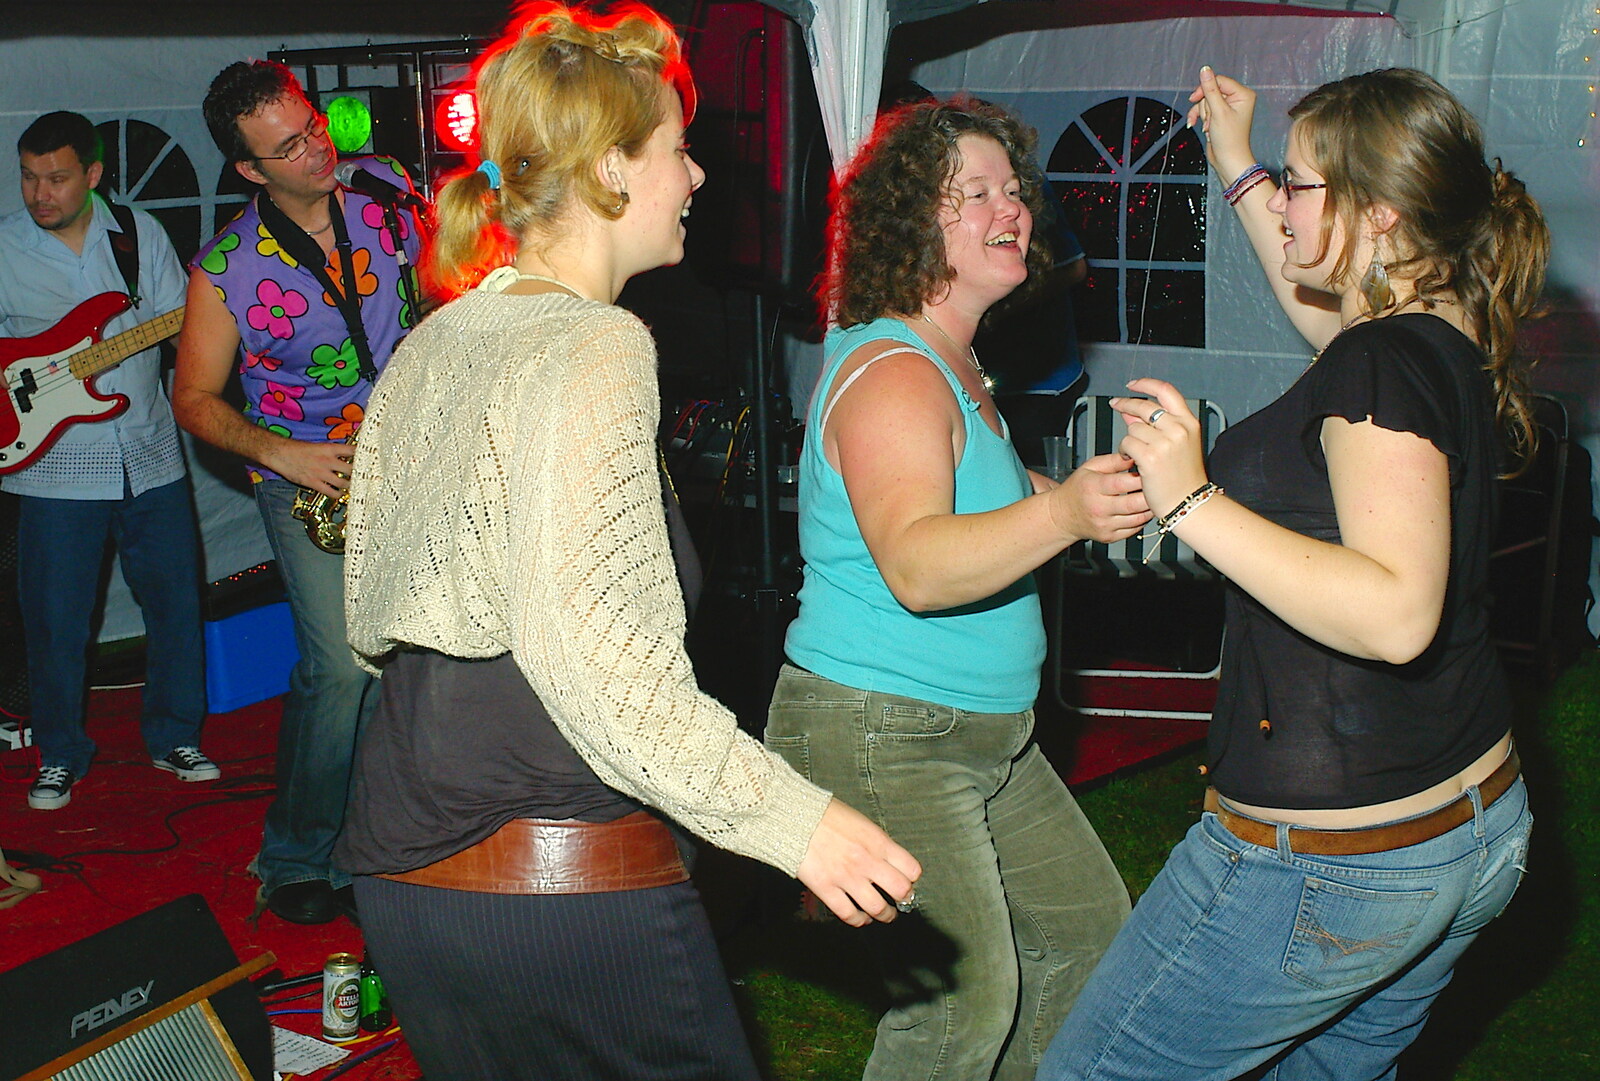 Jo and Steph's Party, Burston, Norfolk - 30th September 2005: Jo and Stef do some dancing